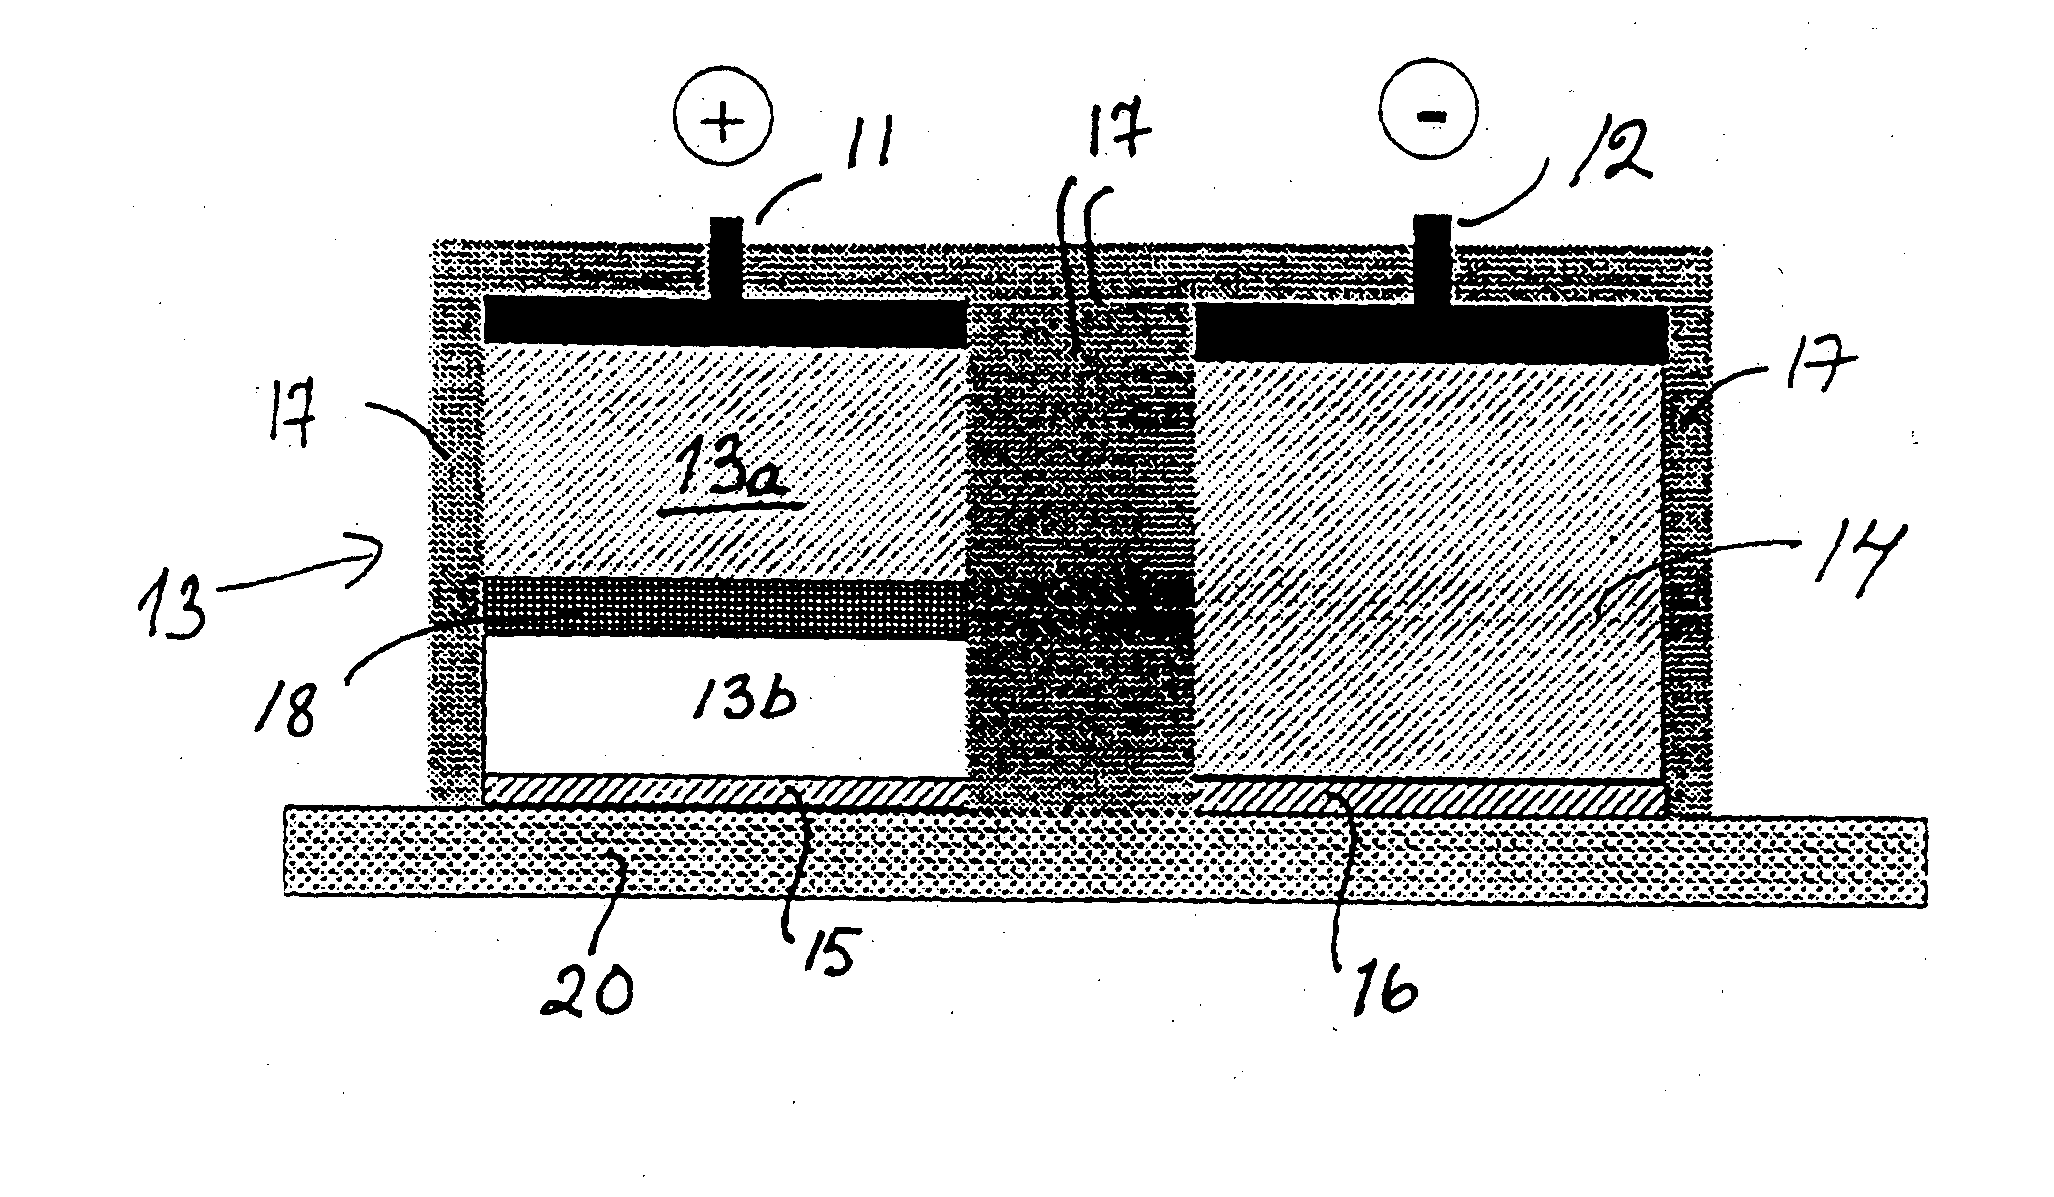 Iontophoretic device for dosaging of an active ingredient